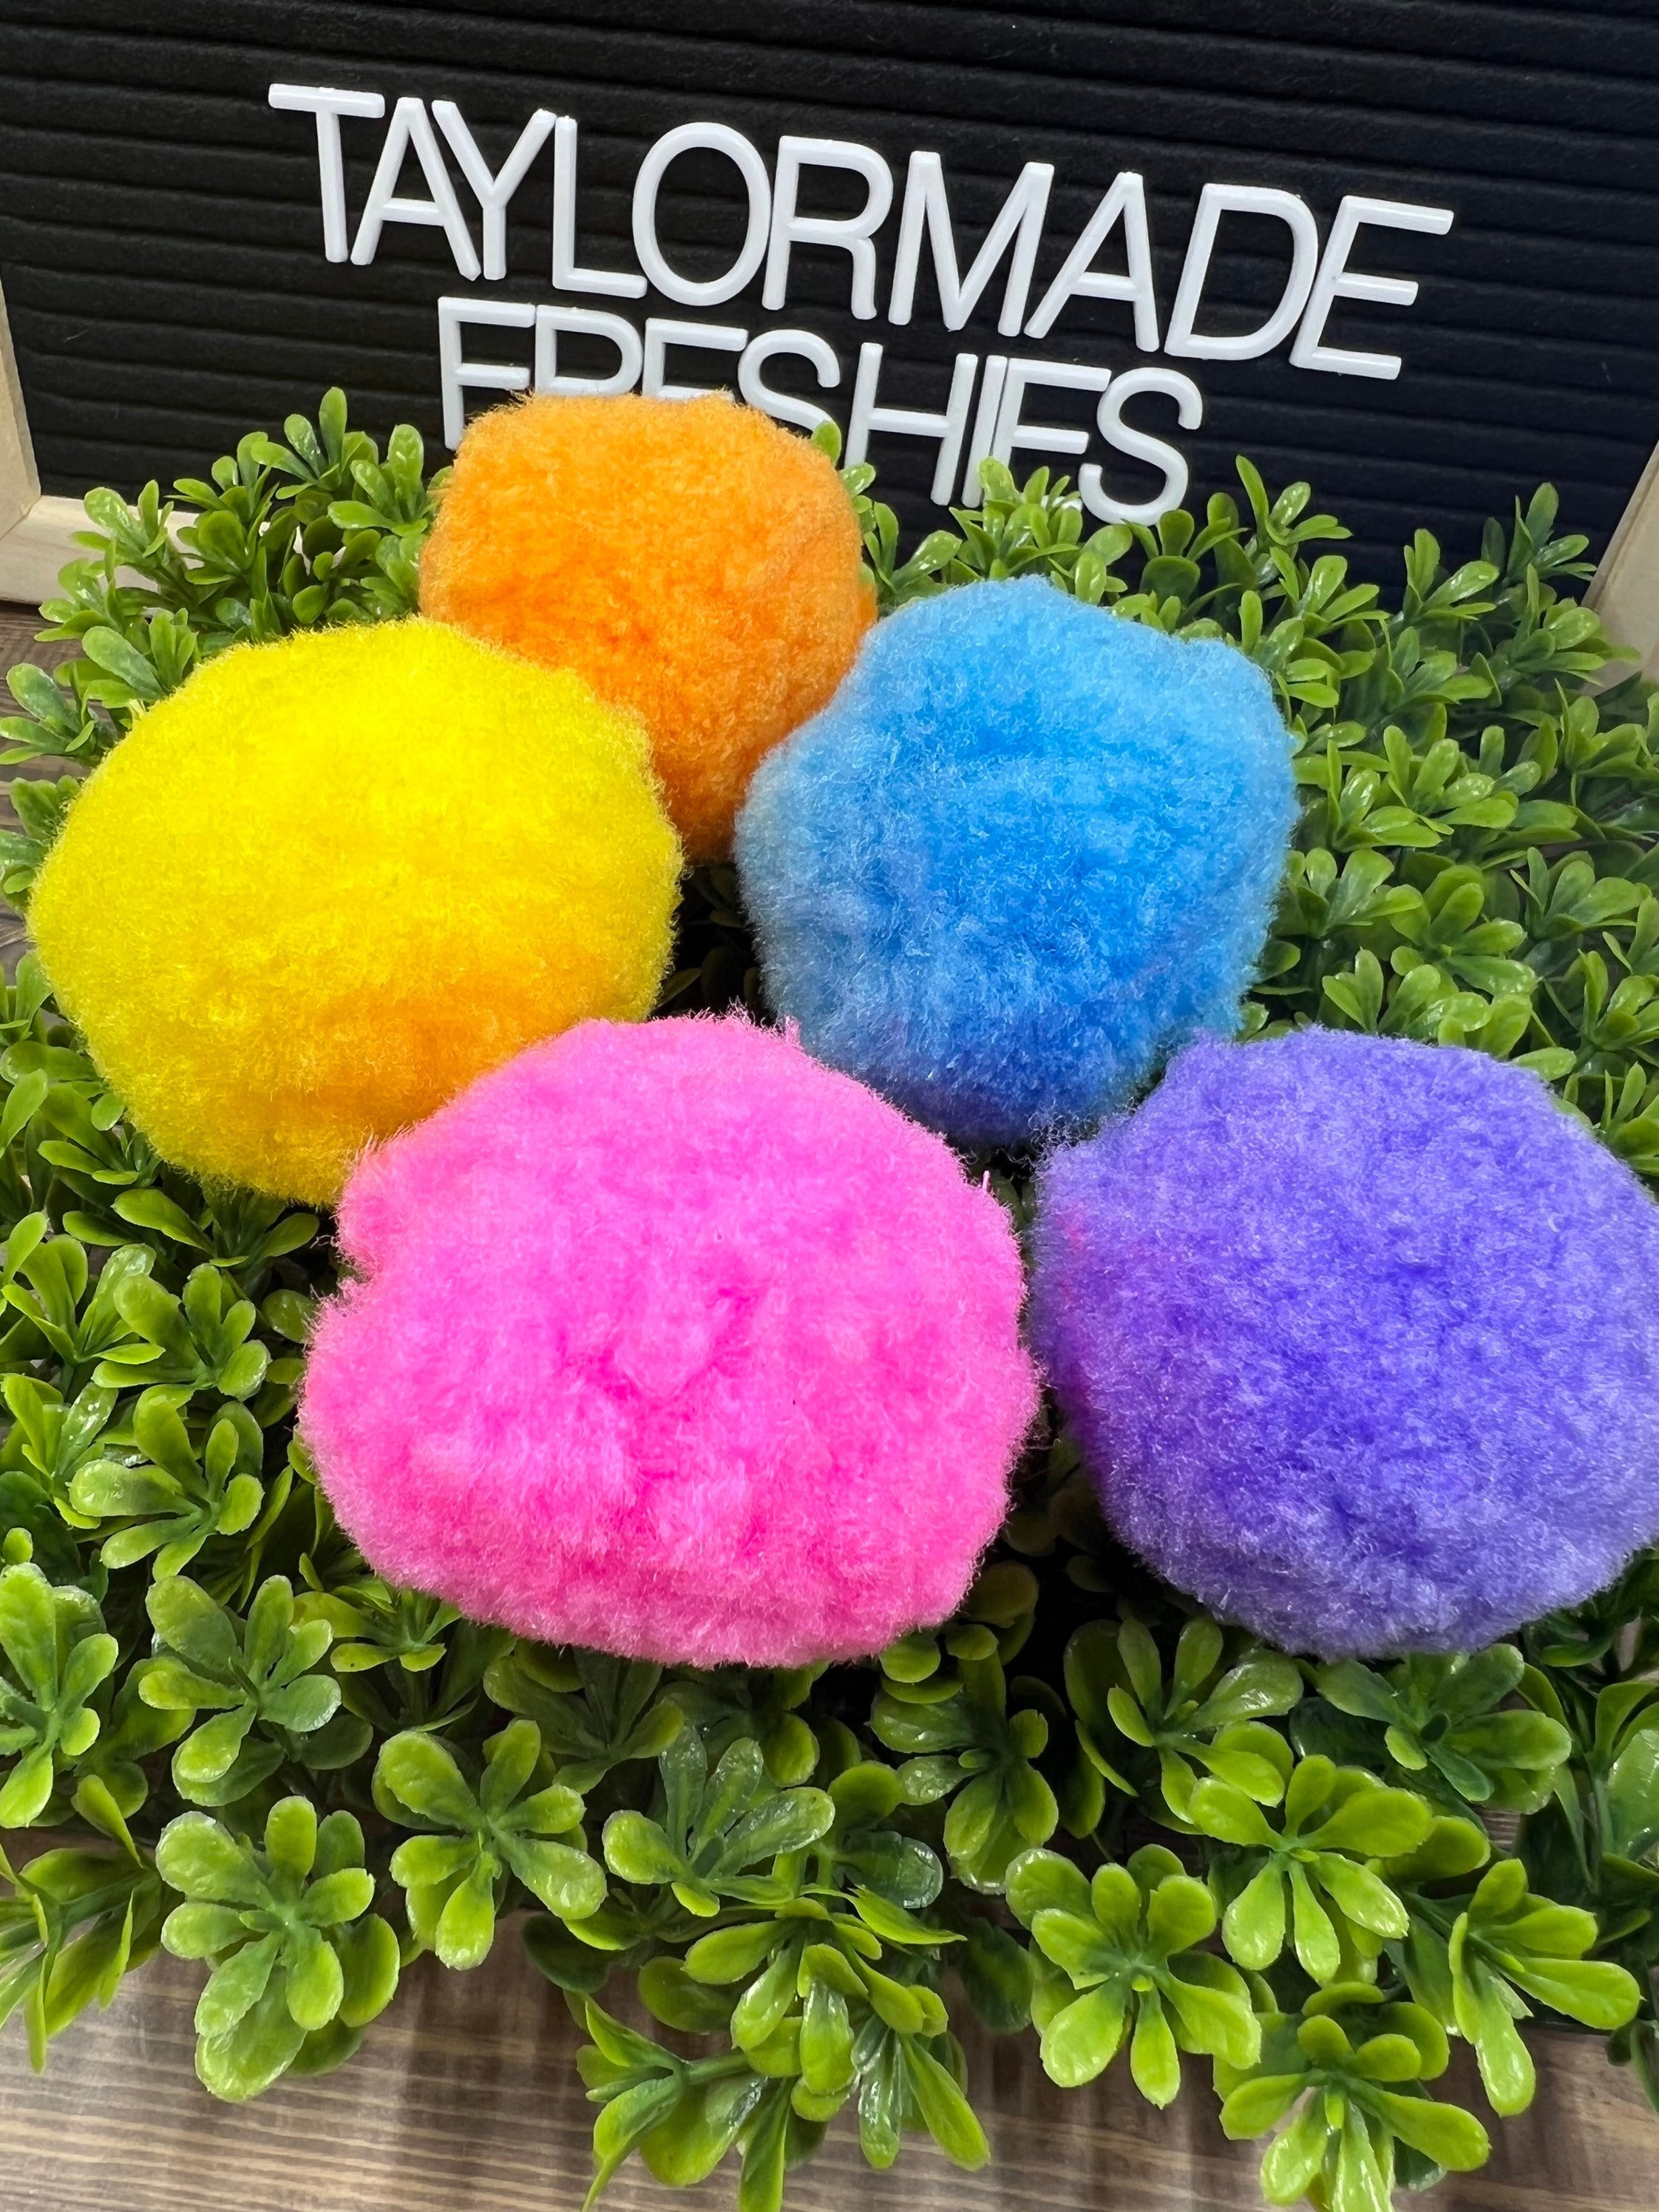 Four Extra Large Pom Poms 4 Custom Made Yarn Balls in 55 Colors